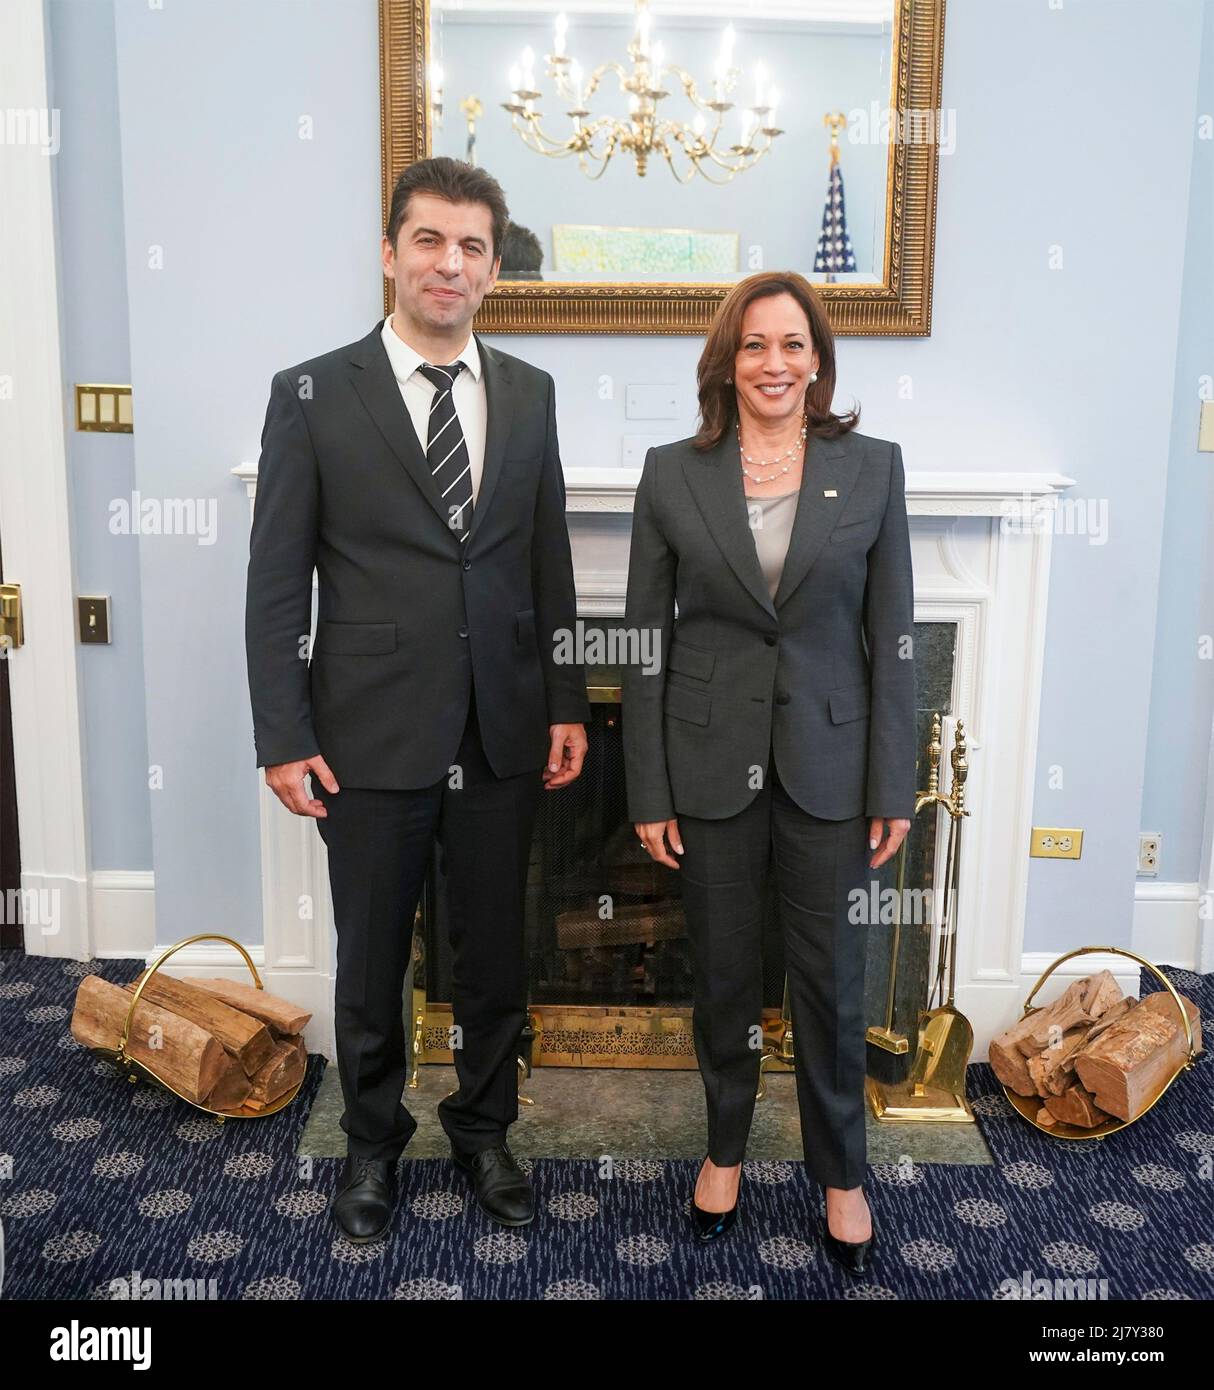 Washington, United States Of America. 10th May, 2022. Washington, United States of America. 10 May, 2022. U.S President Vice President Kamala Harris poses with Bulgarian Prime Minister Kiril Petkov, left, before the start of their bilateral meeting at the White House, May 10, 2022 in Washington, DC Credit: Lawrence Jackson/White House Photo/Alamy Live News Stock Photo